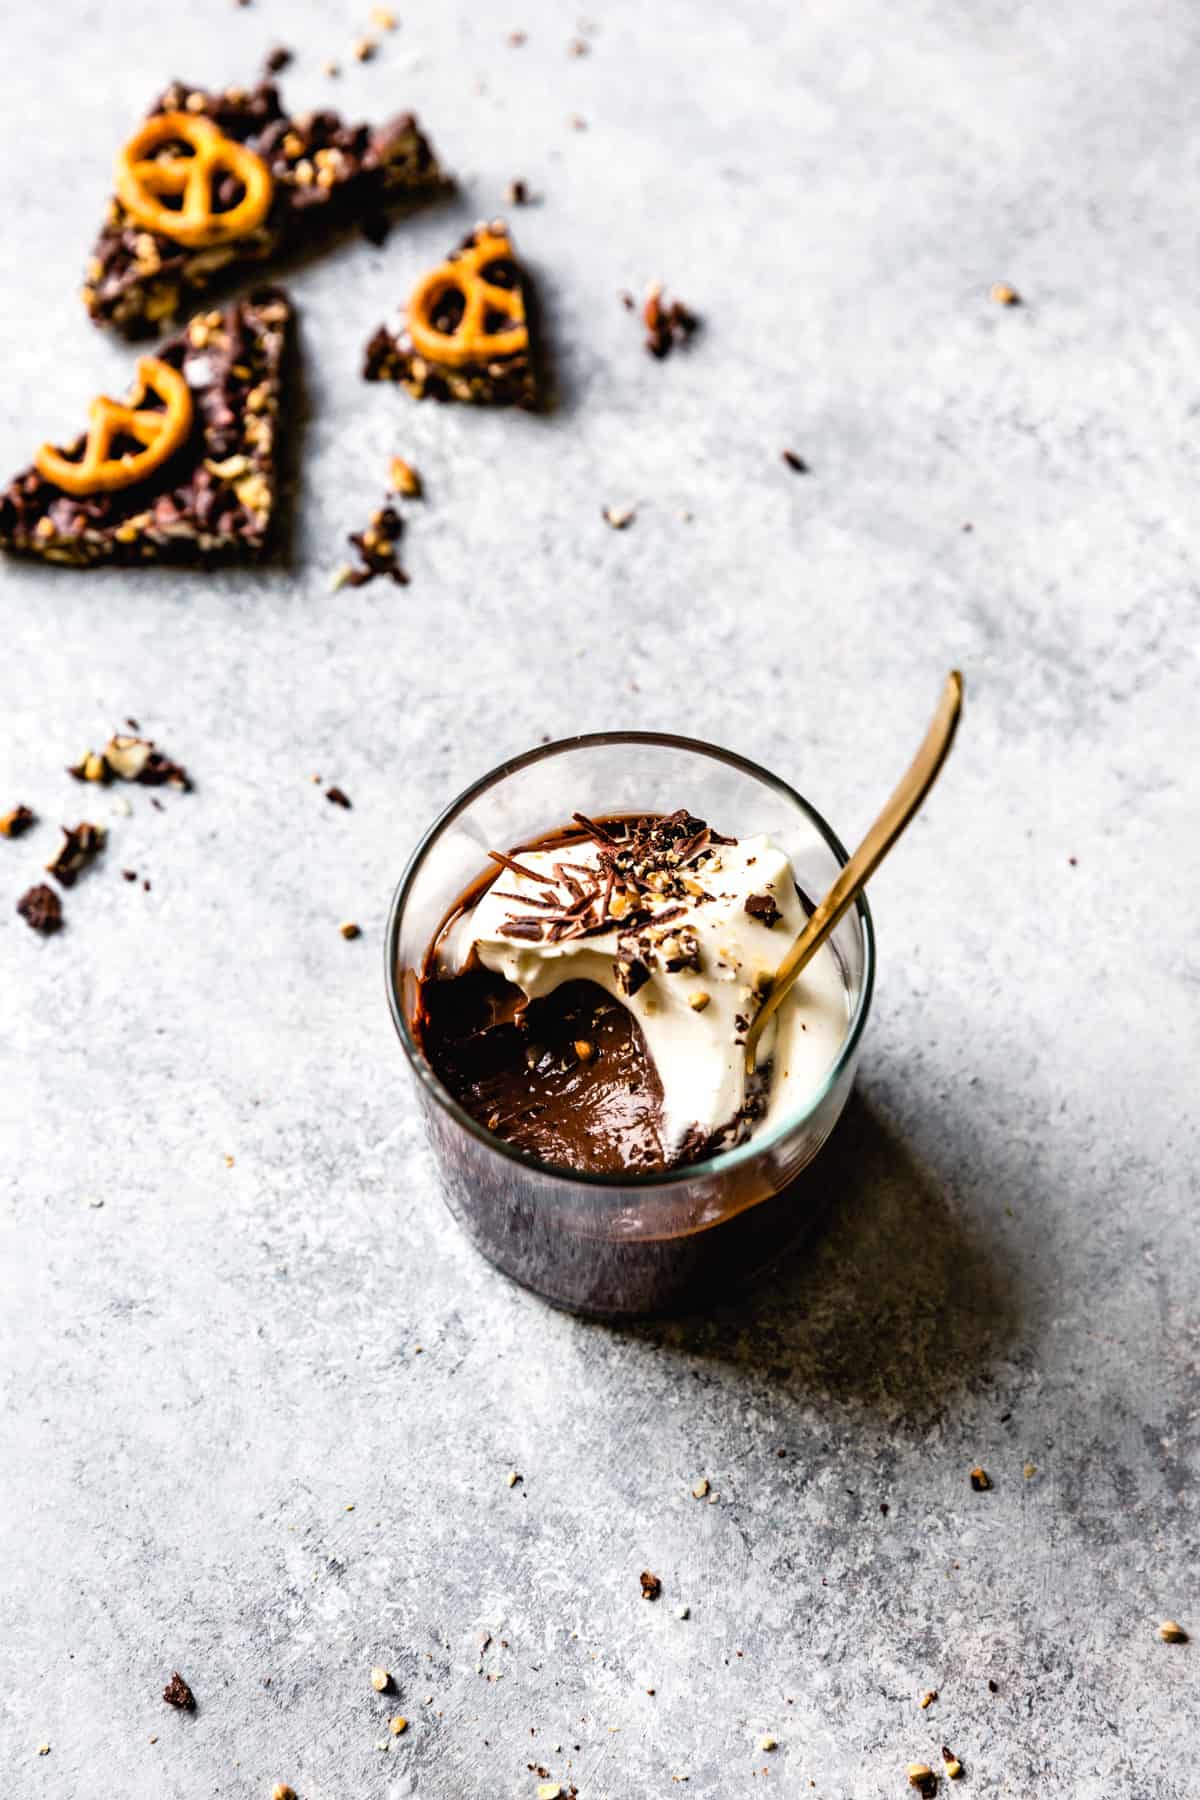 spoon in glass of Chocolate Pudding from Scratch